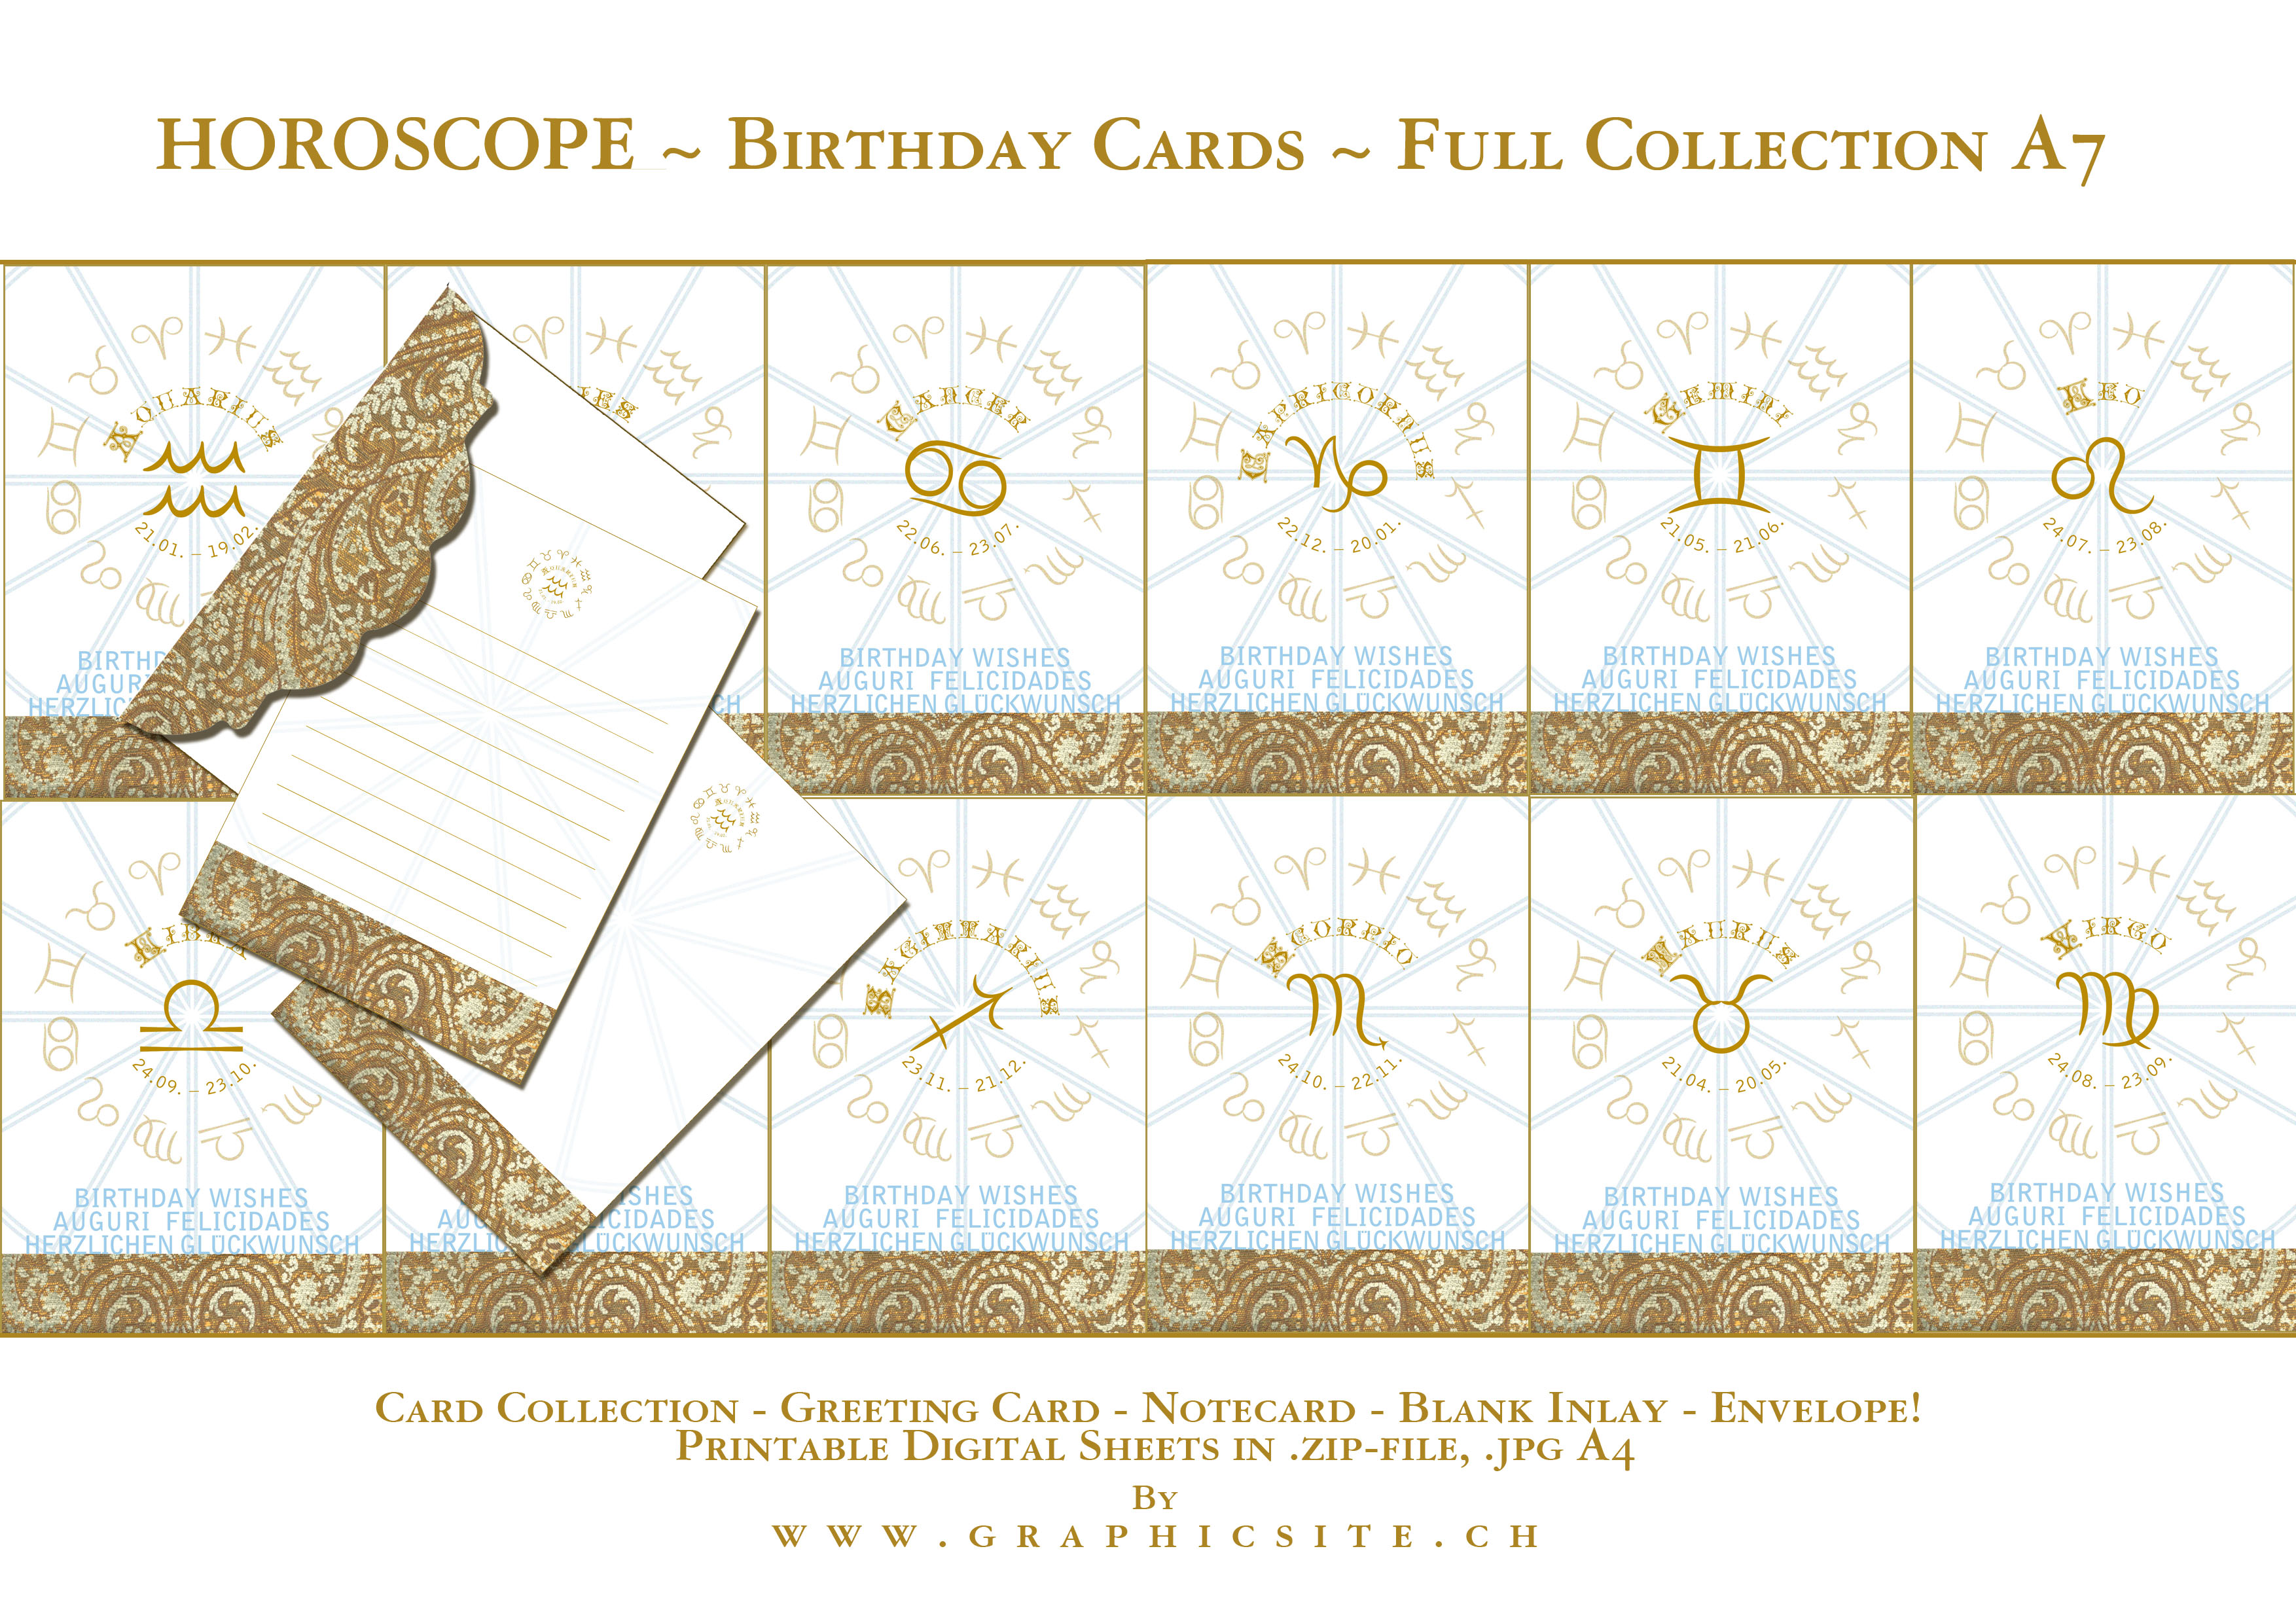 Printable Digital Sheets - Birthday Card Collection - Horoscope - Zodiac - Full Collection - A7 - GraphicDesign, Luzern